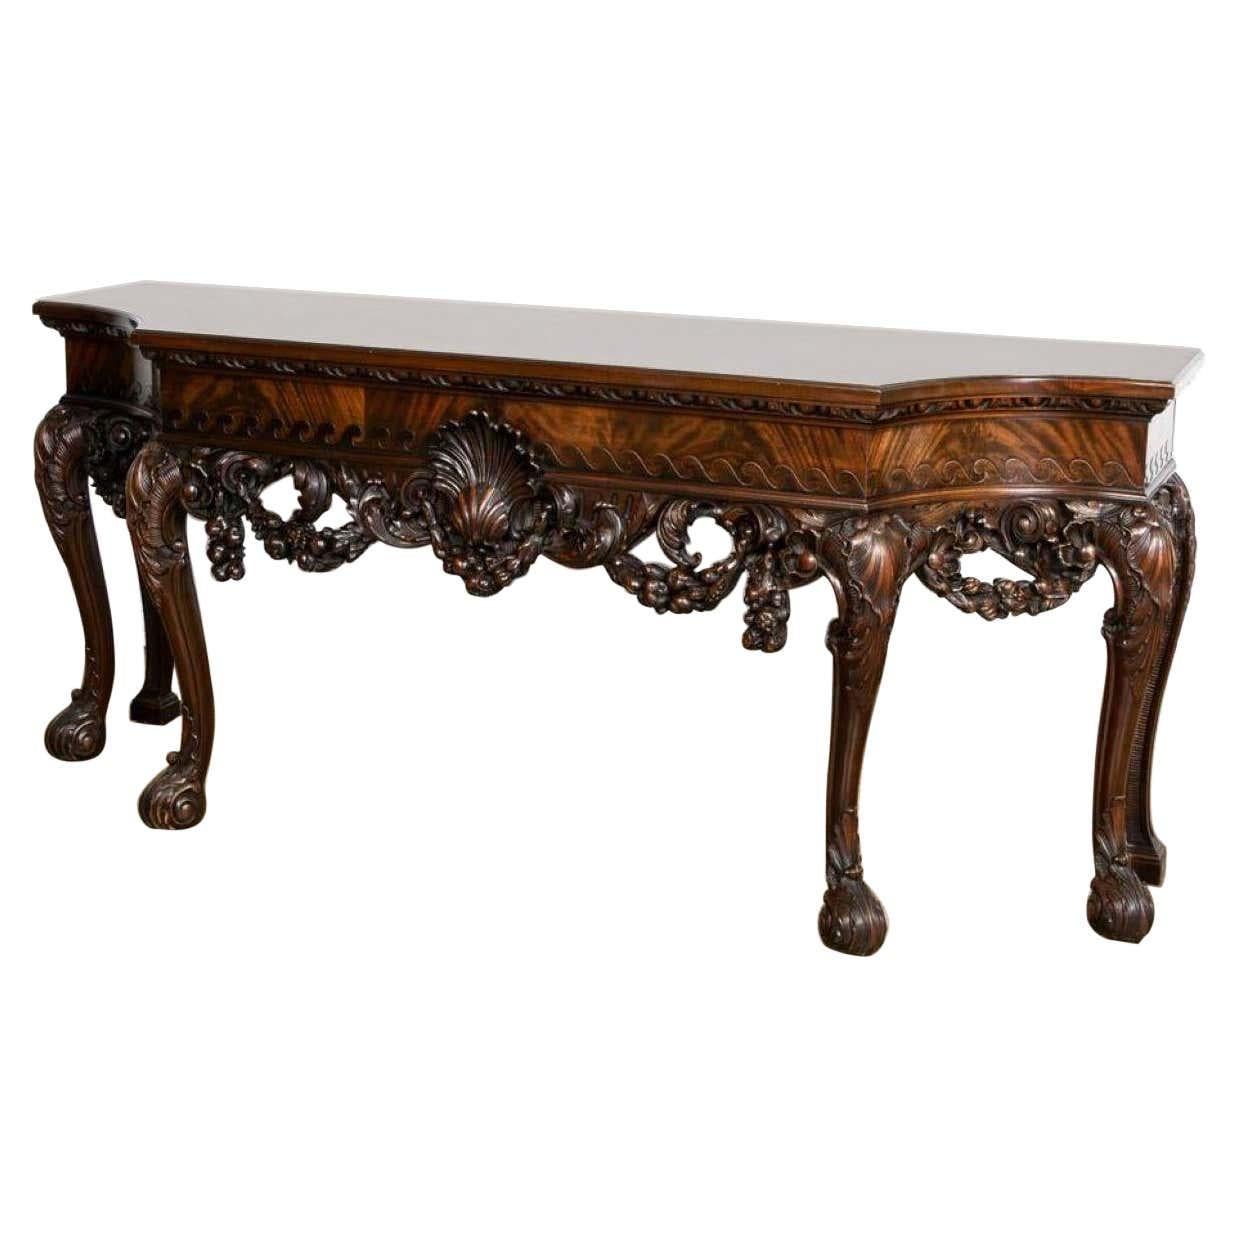 English Large Well Carved Mahogany Console Table in the Irish George II Style